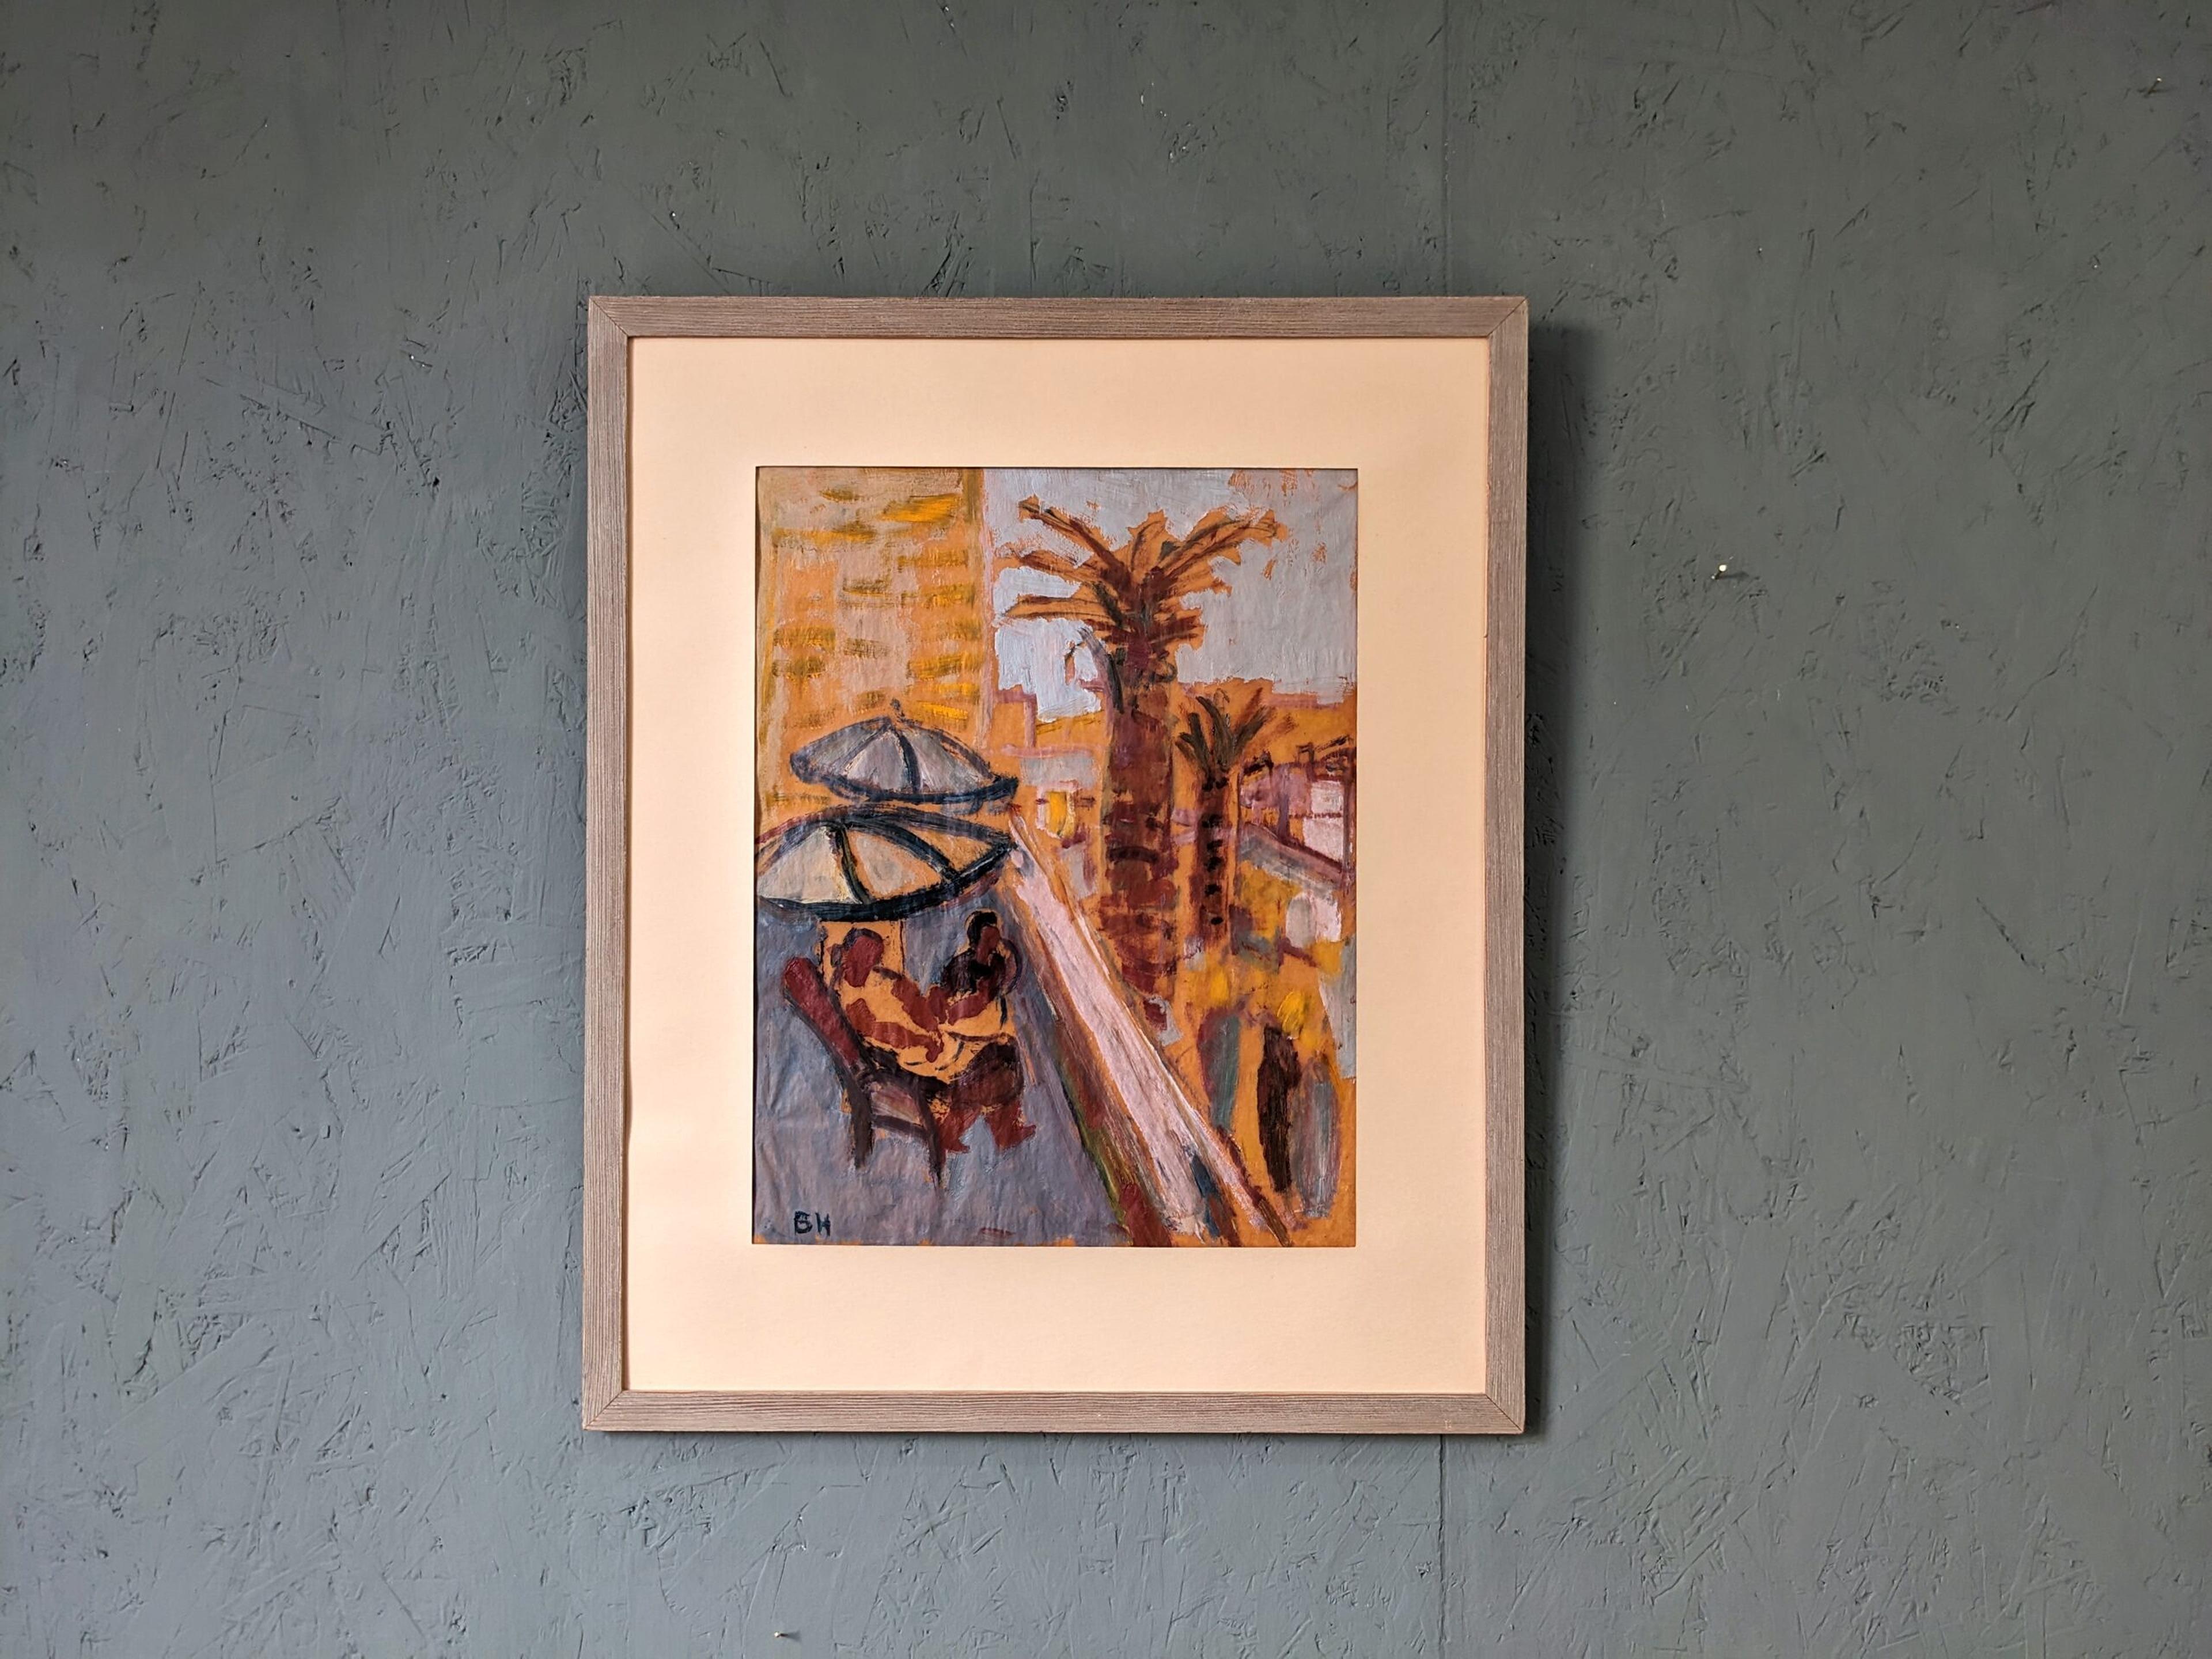 SUMMER HOLIDAY 
Size: 58 x 48 cm (including frame)
Oil on Paper

A striking mid century figurative composition, painted in oil onto paper, by the established female Swedish artist Brita Hansson (1918-1979).

Executed in an expressionist manner,